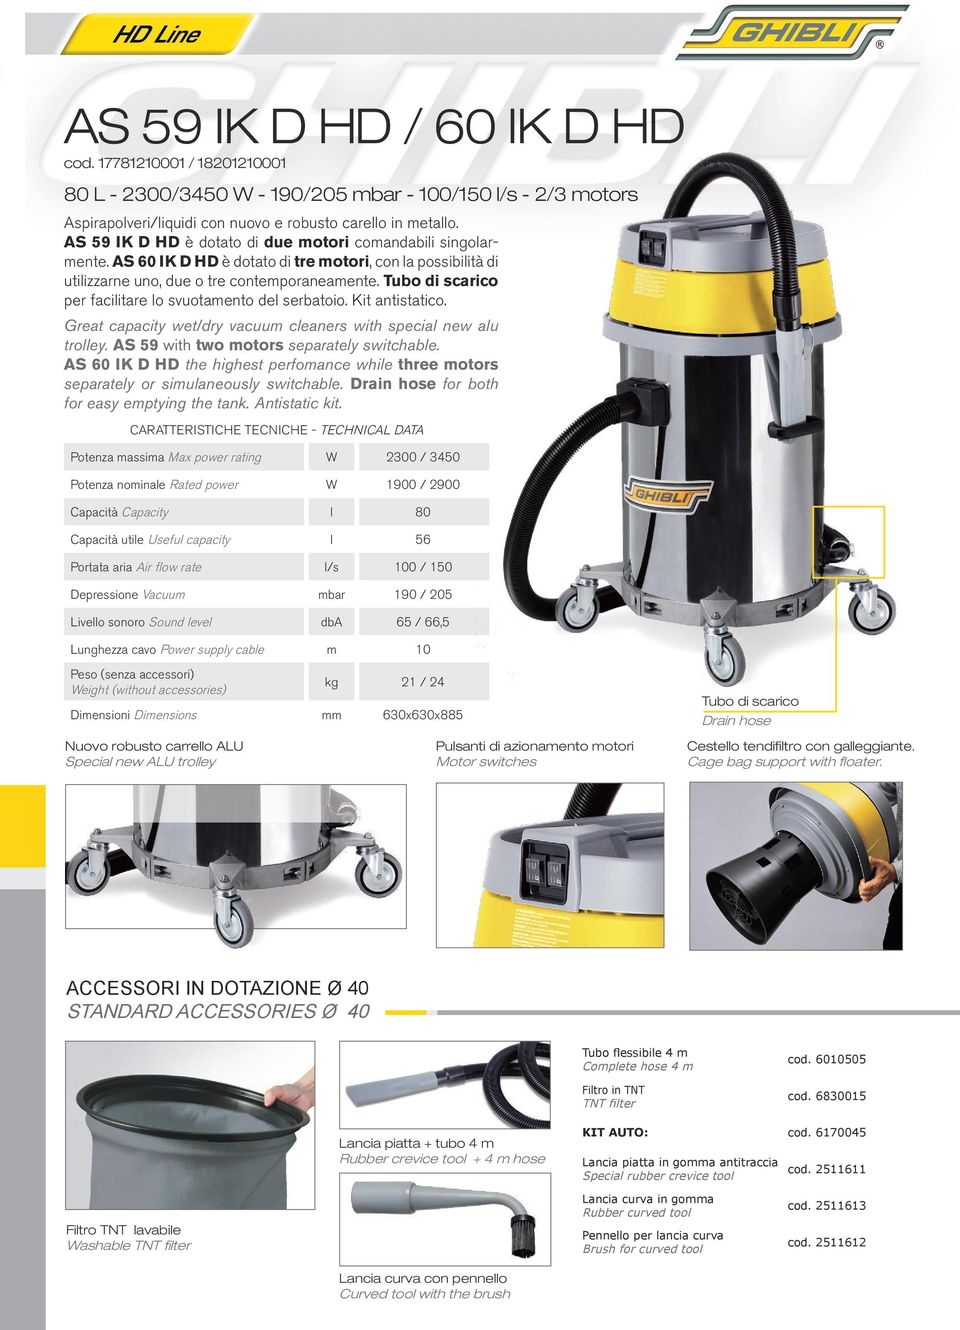 Tubo di scarico per facilitare lo svuotamento del serbatoio. Kit antistatico. Great capacity wet/dry vacuum cleaners with special new alu trolley. AS 59 with two motors separately switchable.